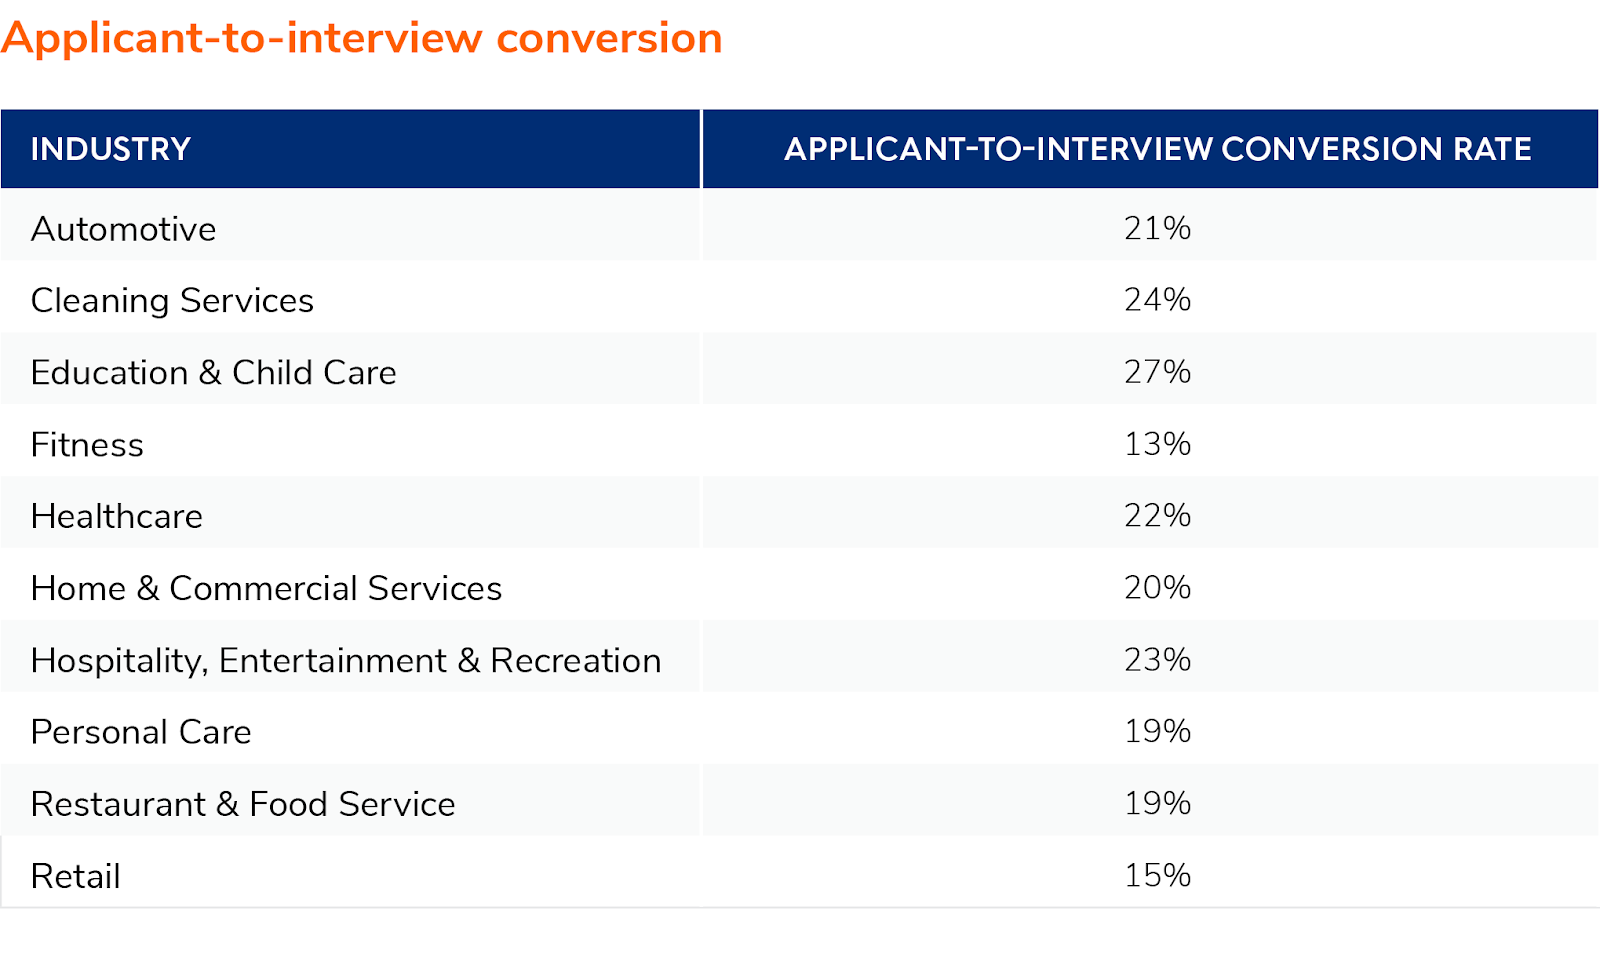 applicant-to-interview conversion by industry 